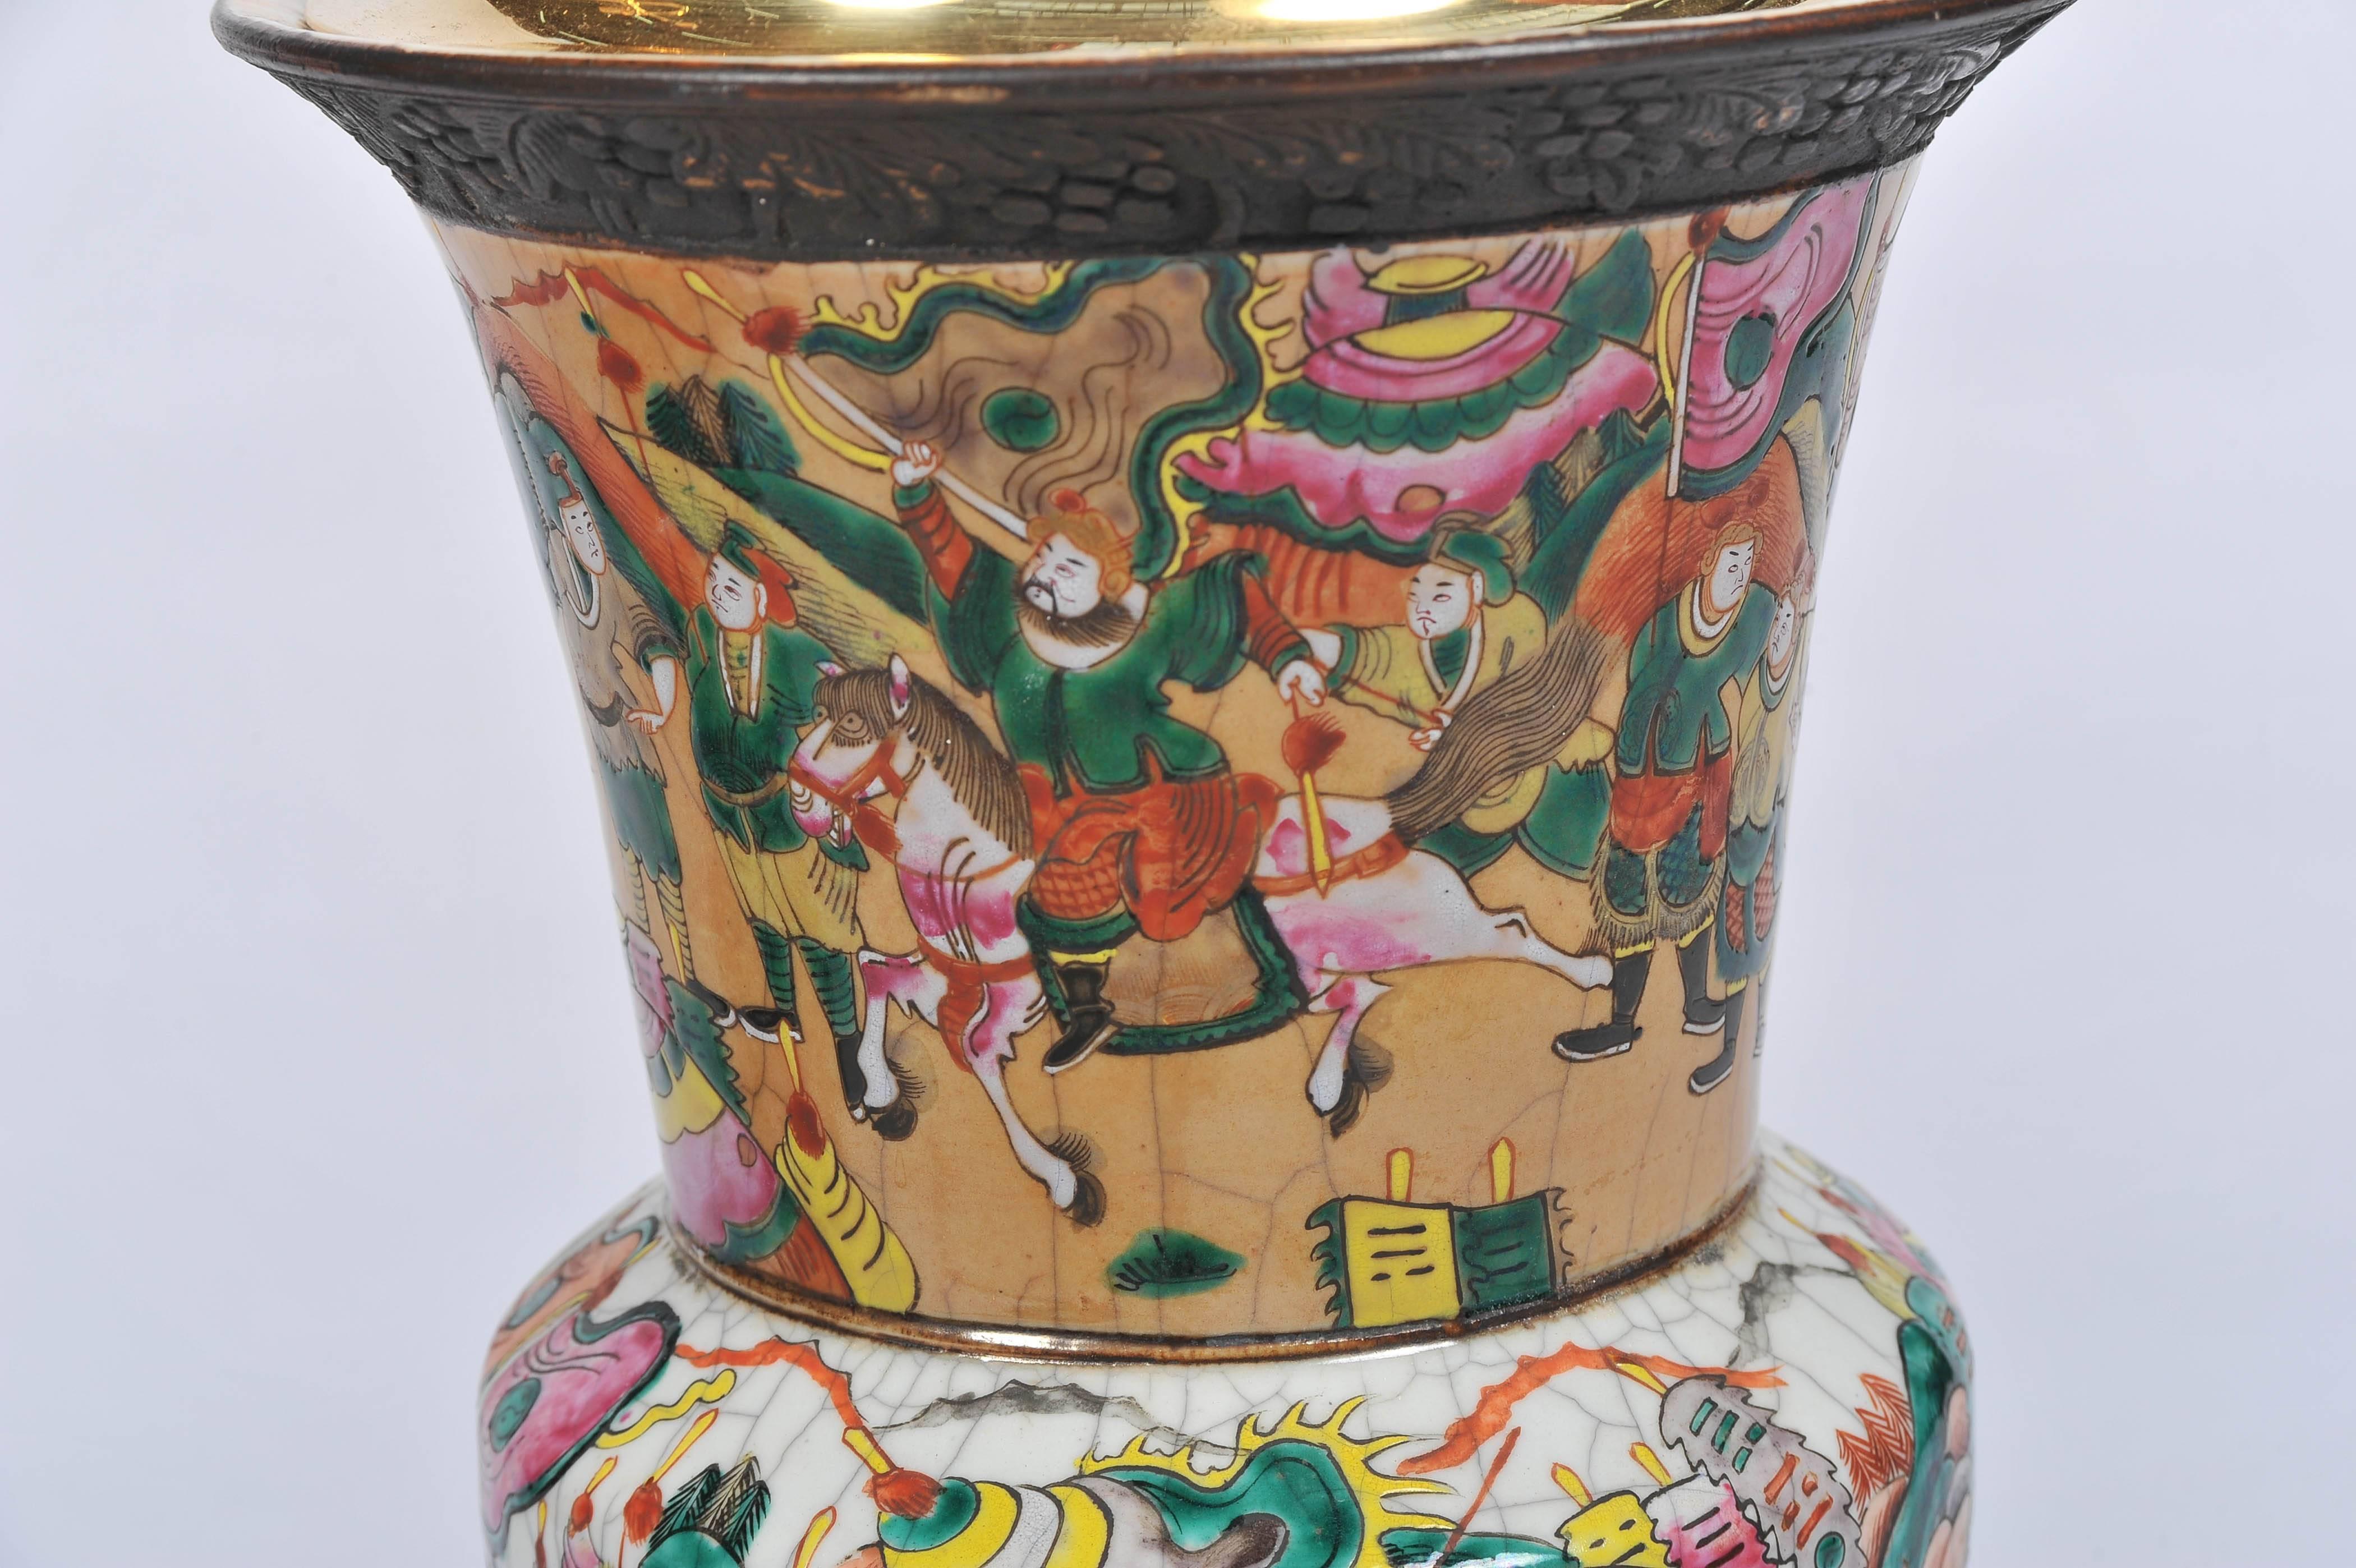 Chinese Export Pair of 19th Century Chinese Crackleware Vases or Lamps